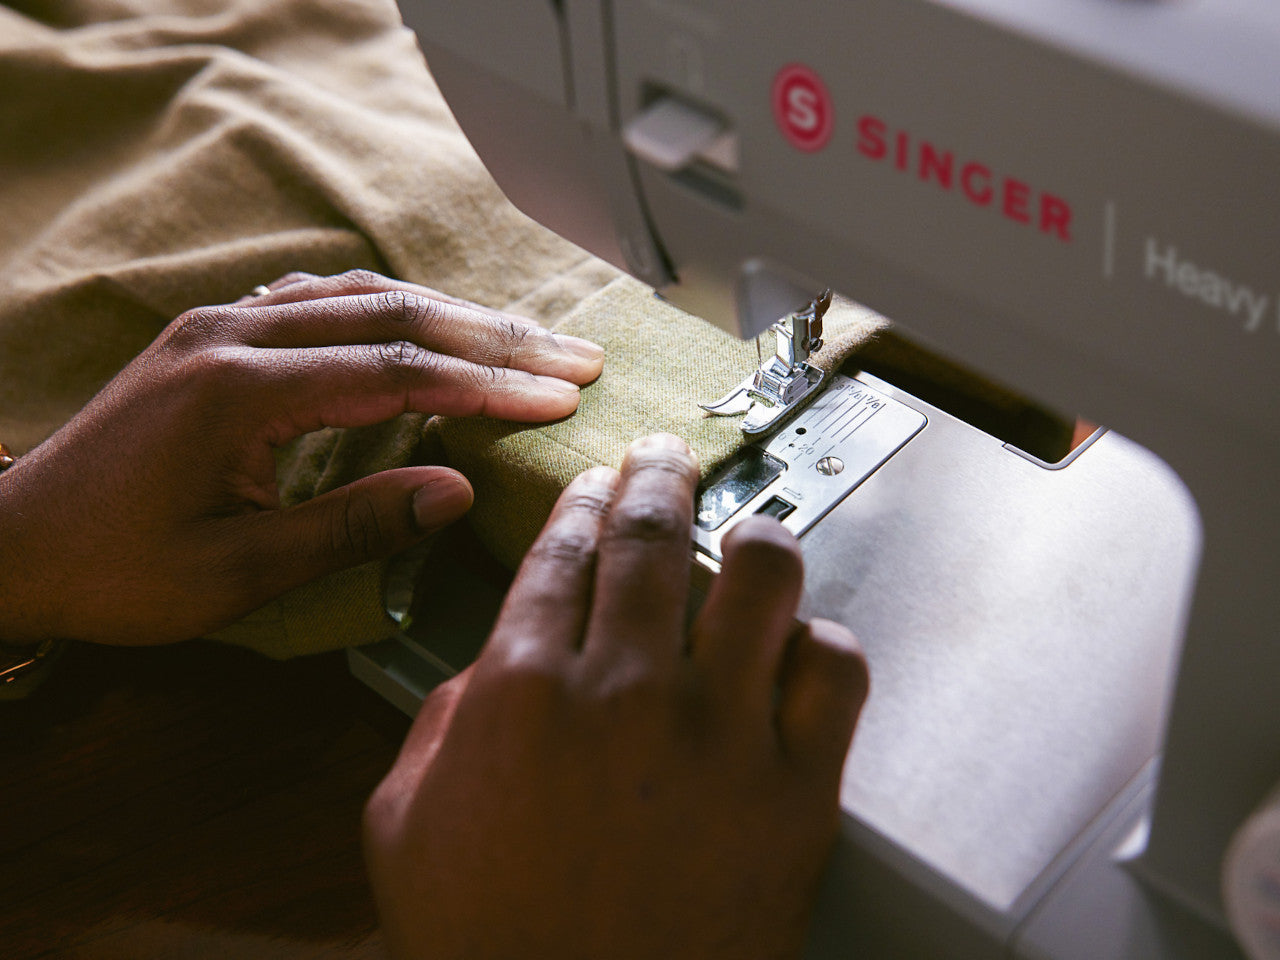 SINGER Heavy Duty 4432 Sewing Machine – Singer South Africa